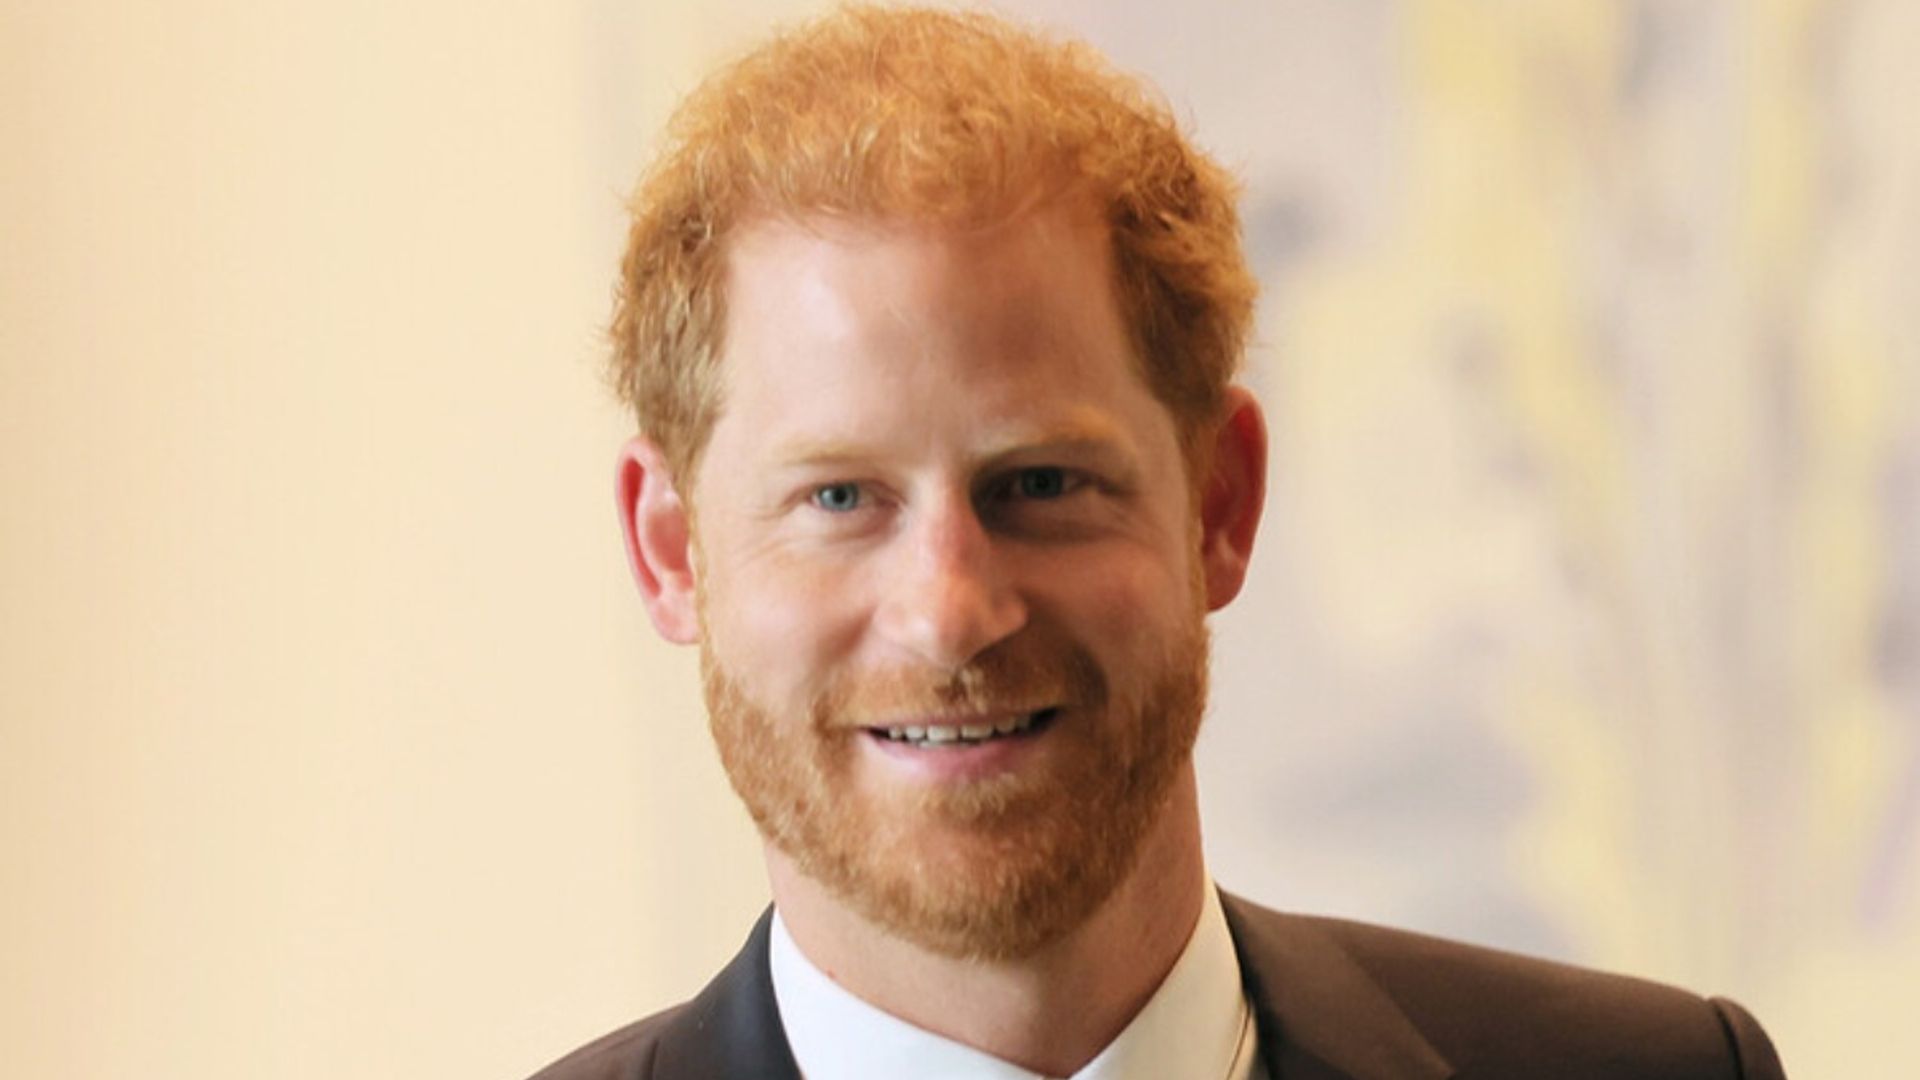 prince harry smiling